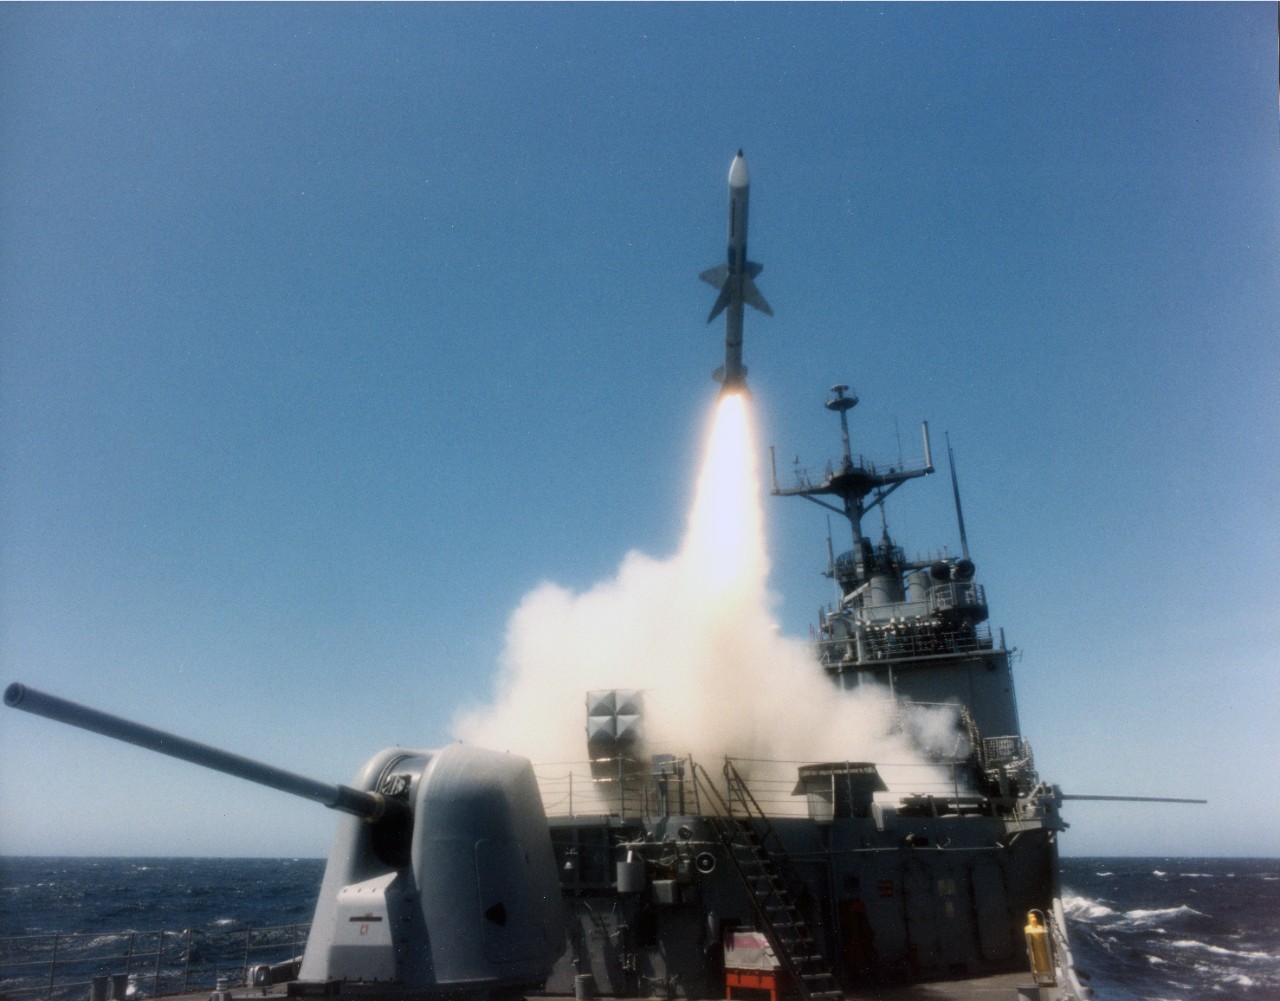 Launching of Sea Sparrow Missile. Unknown ship or date. 